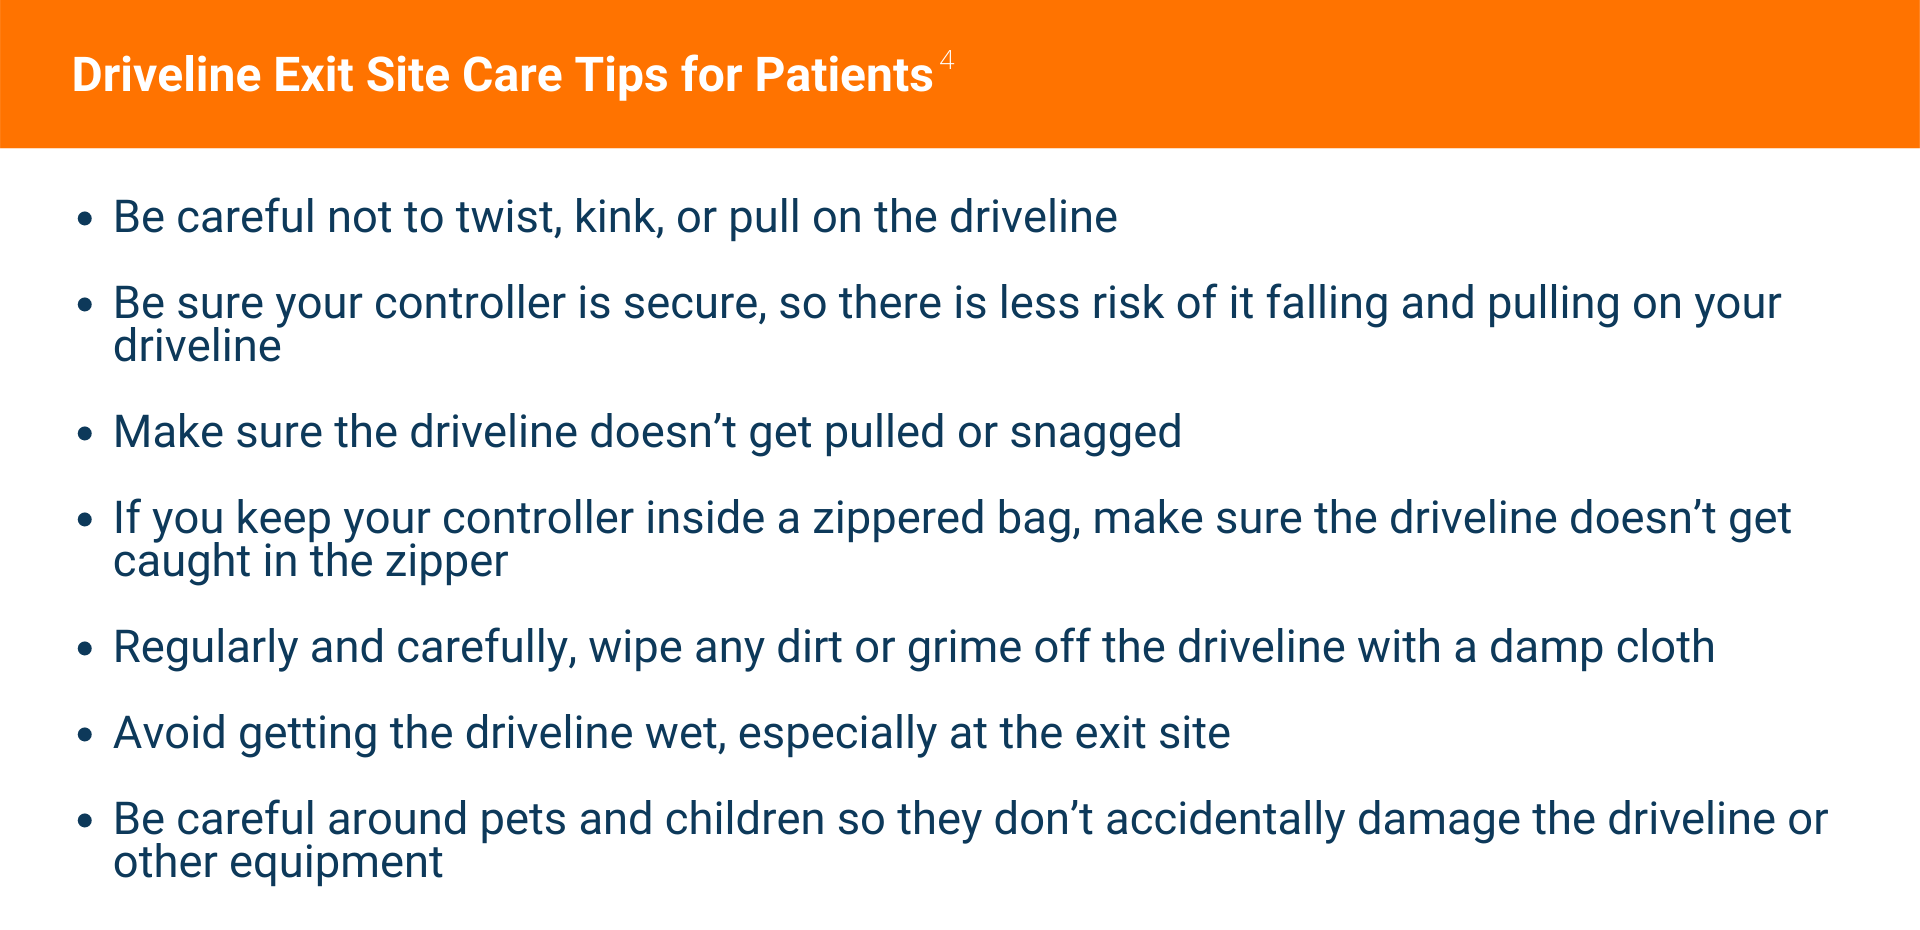 Text: Driveline Exit Site Care Tips for Patients Be careful not to twist, kink, or pull on the driveline Be sure your controller is secure, so there is less risk of it falling and pulling on your driveline Make sure the driveline doesn’t get pulled or snagged If you keep your controller inside a zippered bag, make sure the driveline doesn’t get caught in the zipper Regularly and carefully, wipe any dirt or grime off the driveline with a damp cloth Avoid getting the driveline wet, especially at the exit site Be careful around pets and children so they don’t accidentally damage the driveline or other equipment